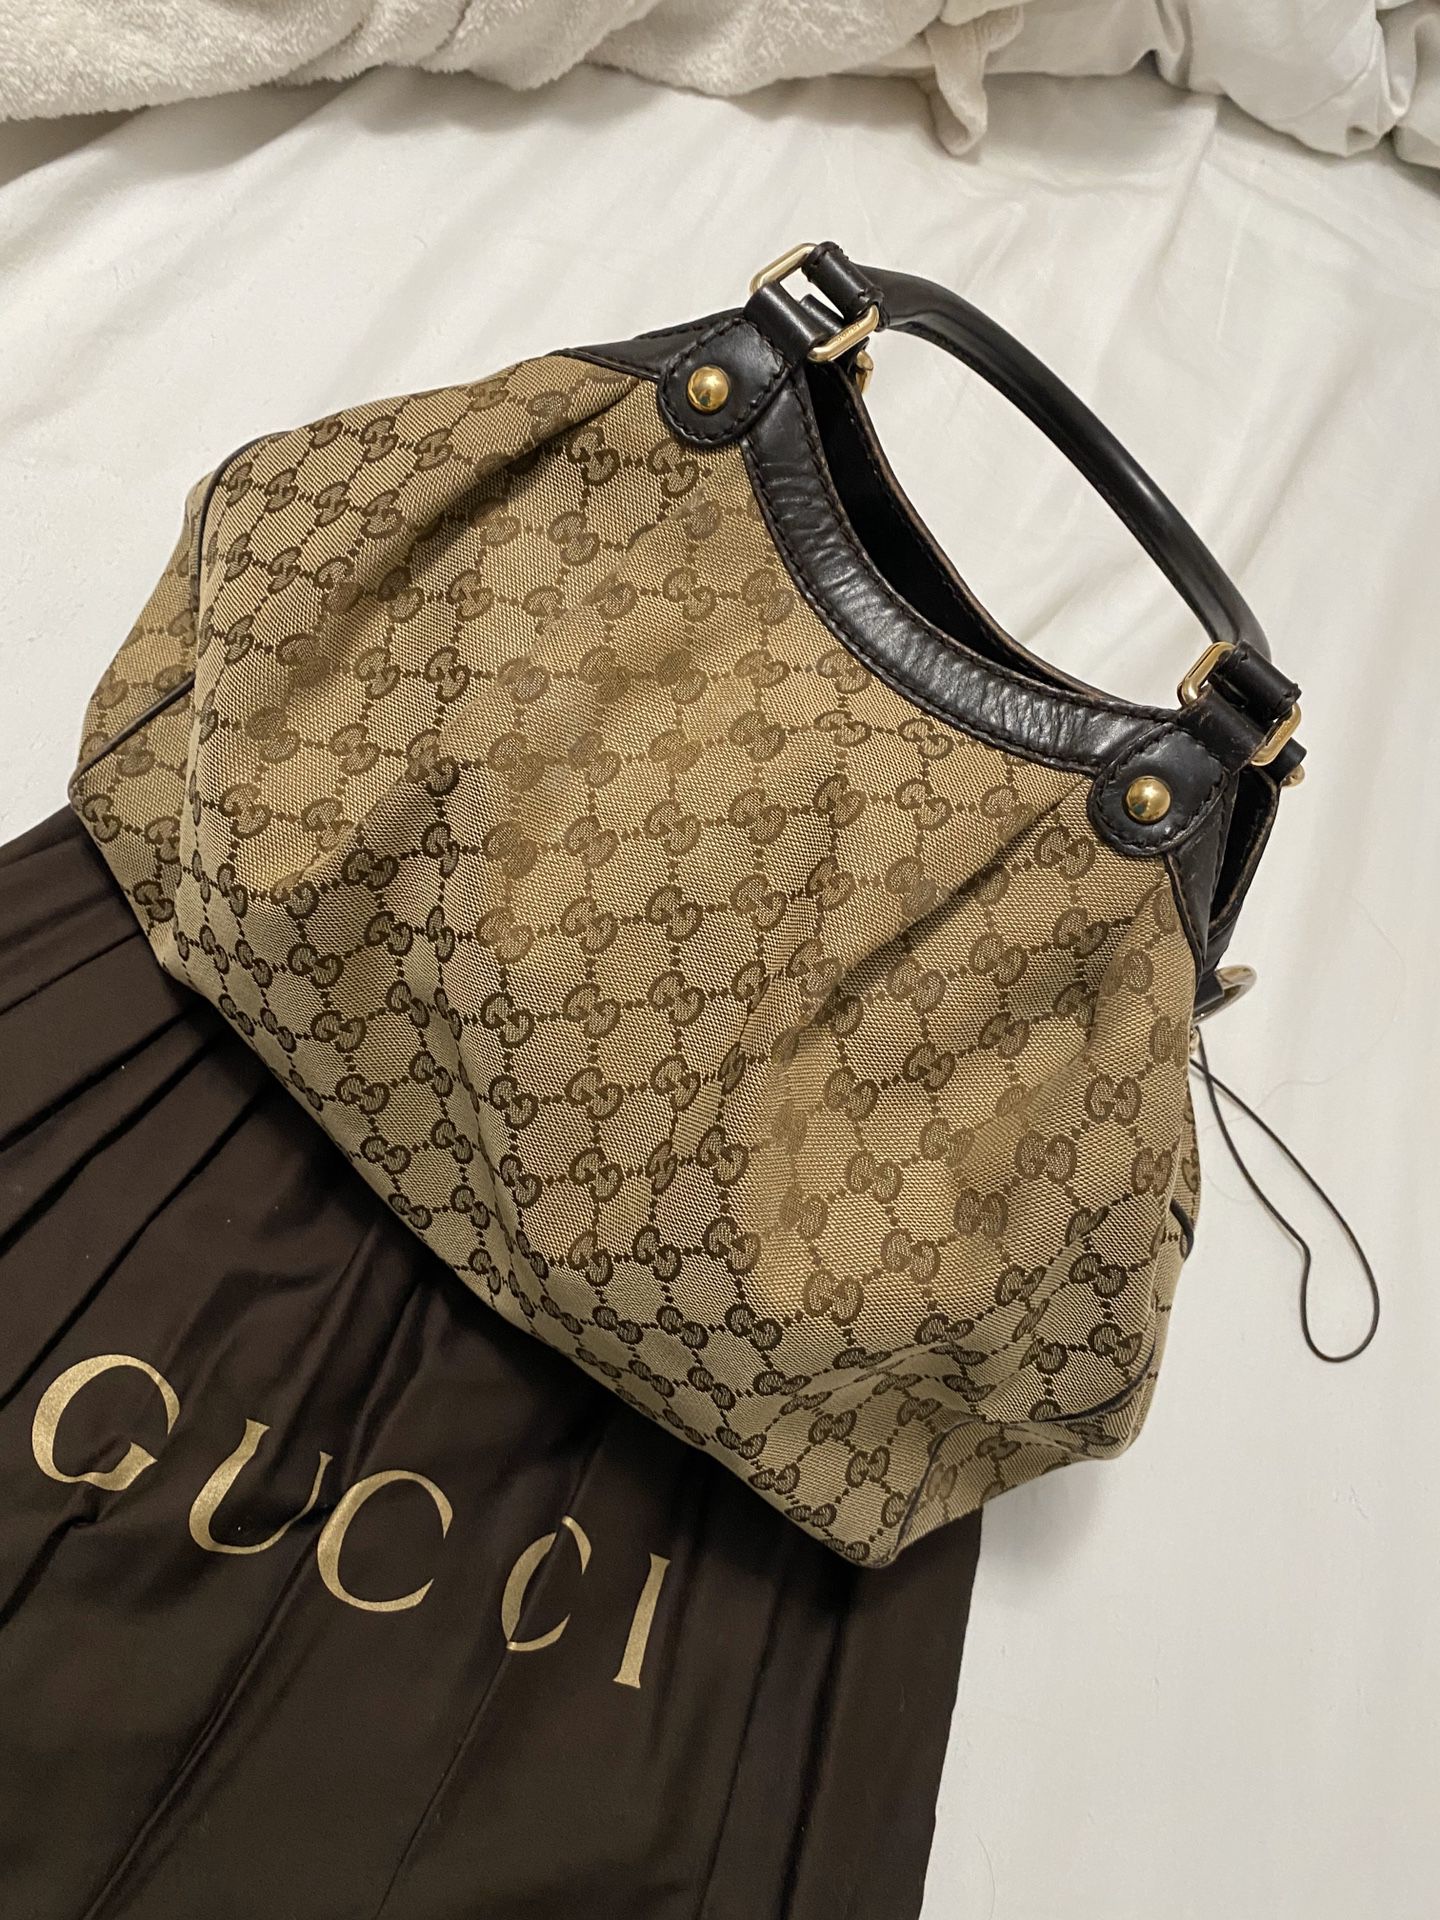 Gucci bag Authentic with dust bag 😍 no rips. Just some light stains inside.